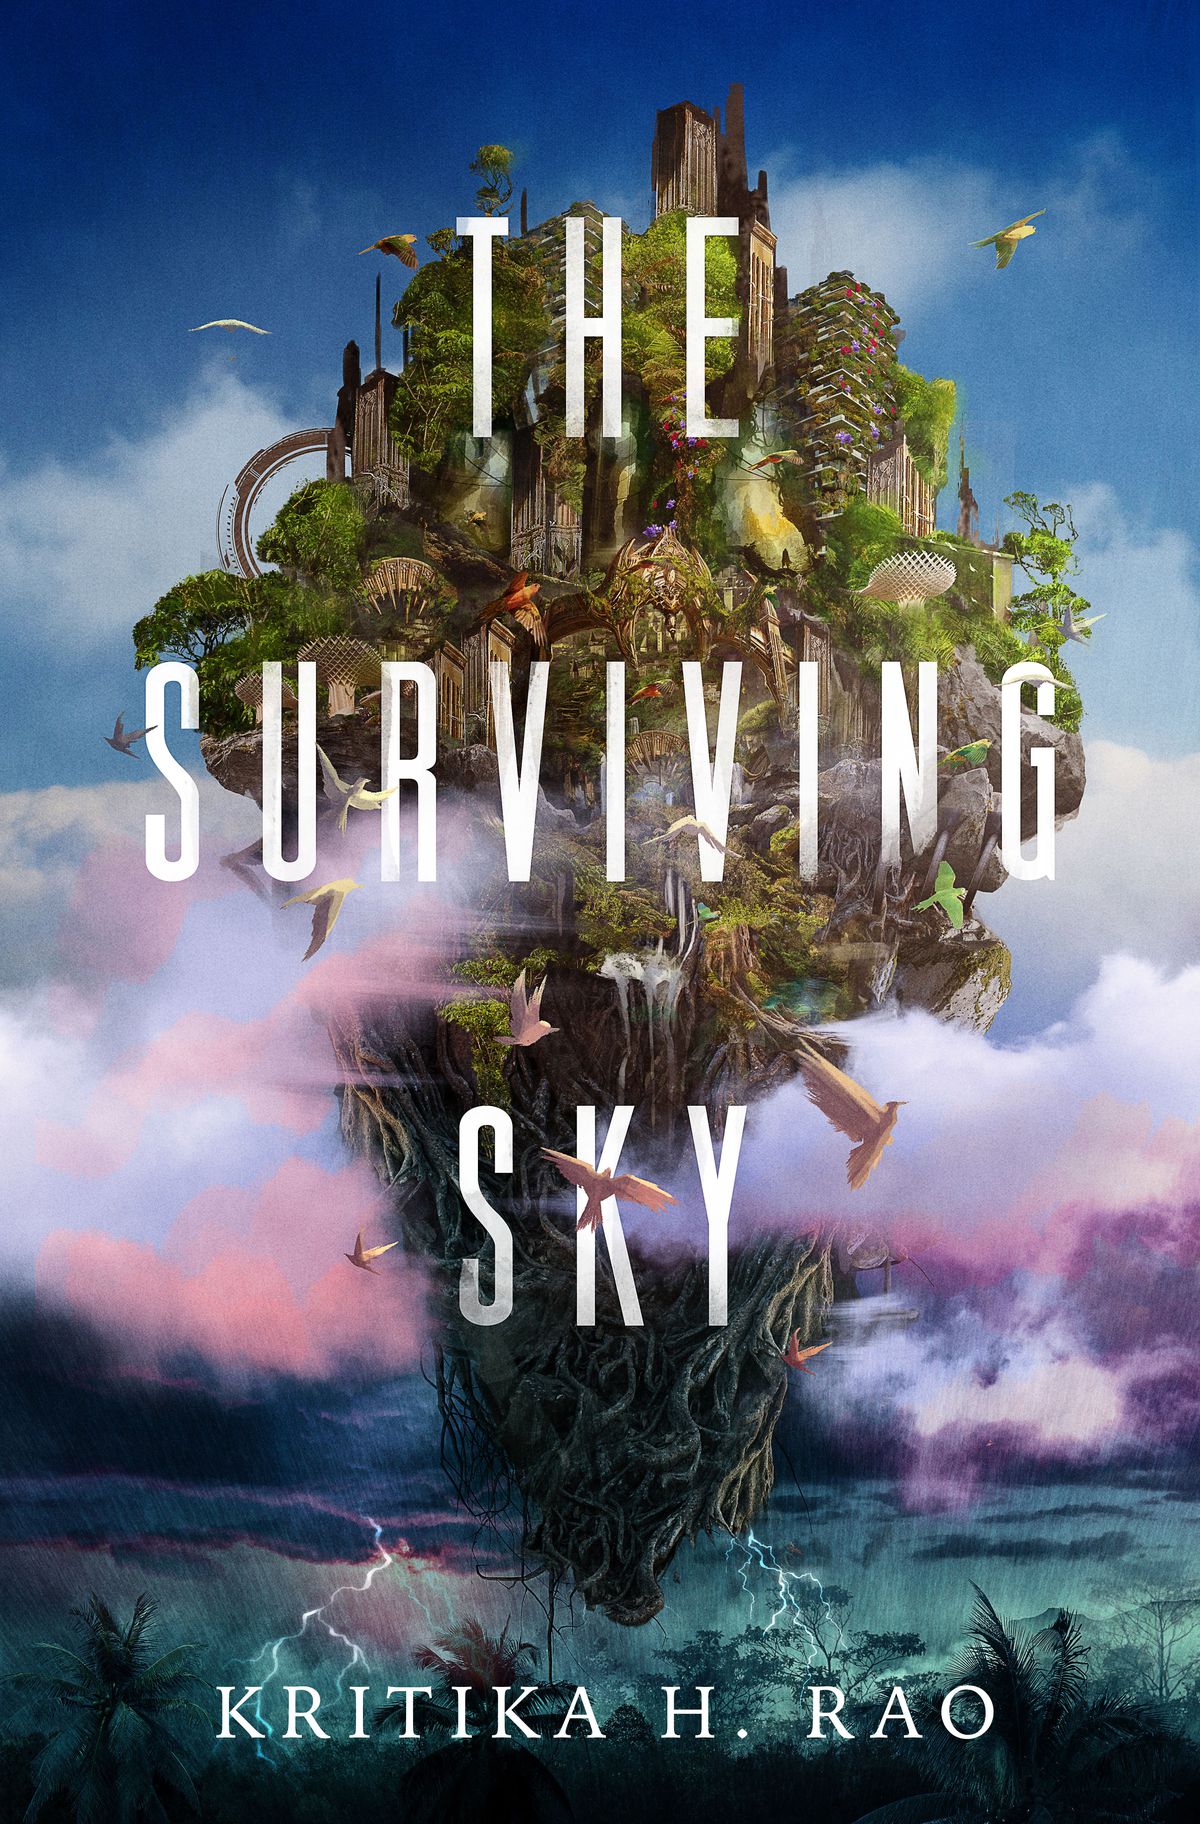 Cover image for Kritika H. Rao’s The Surviving Sky, featuring a floating island overgrowing with buildings and plant life, above a stormy planet.